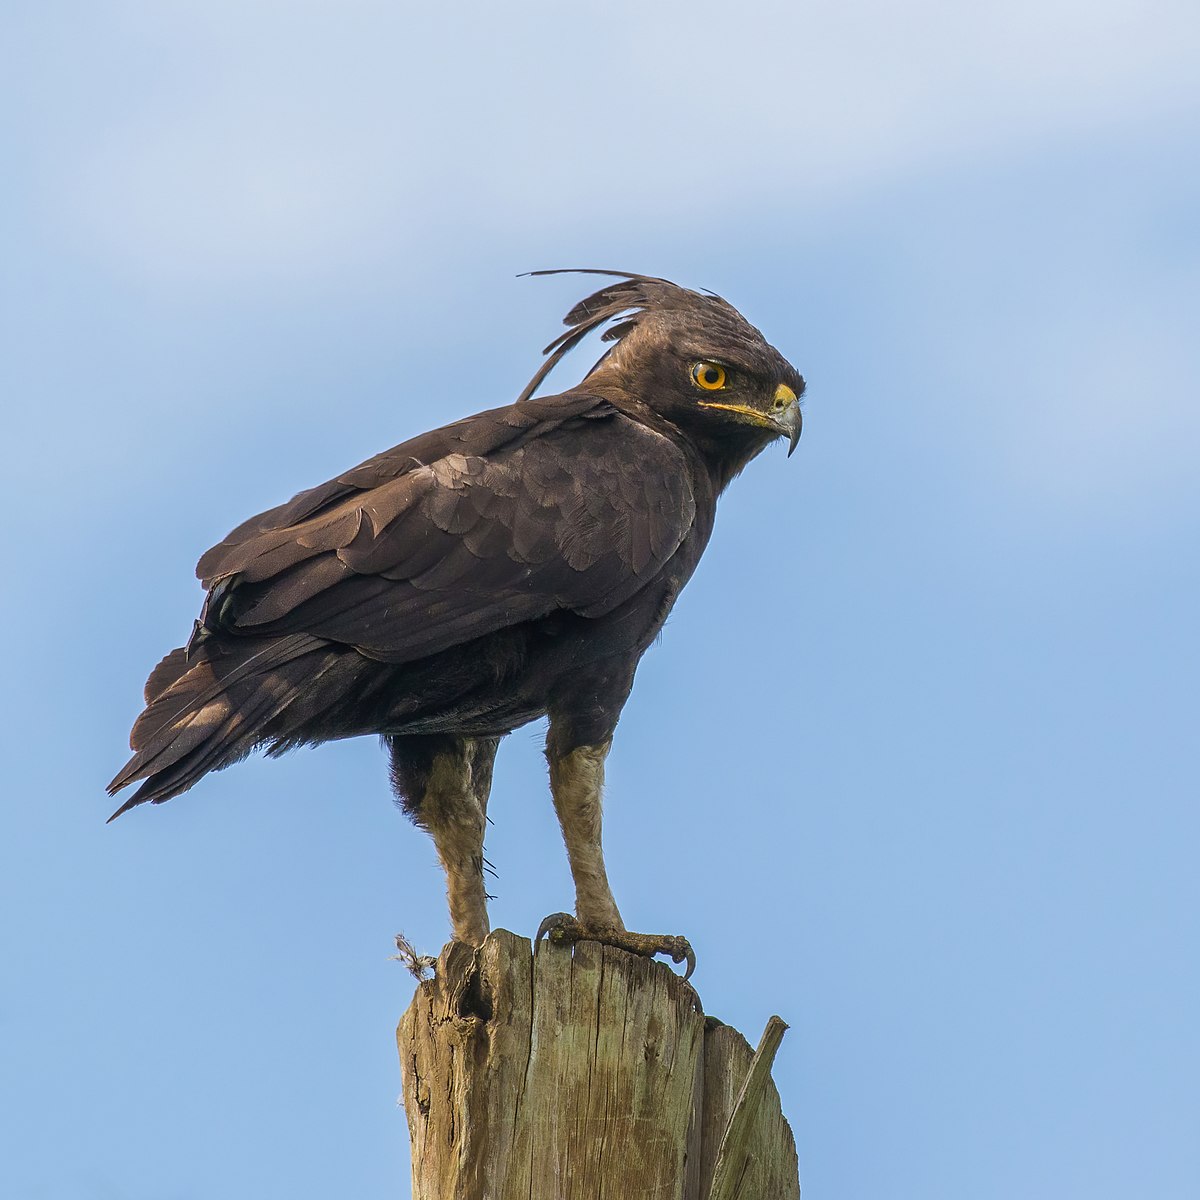 can crested eagles turn their heads 360 degrees